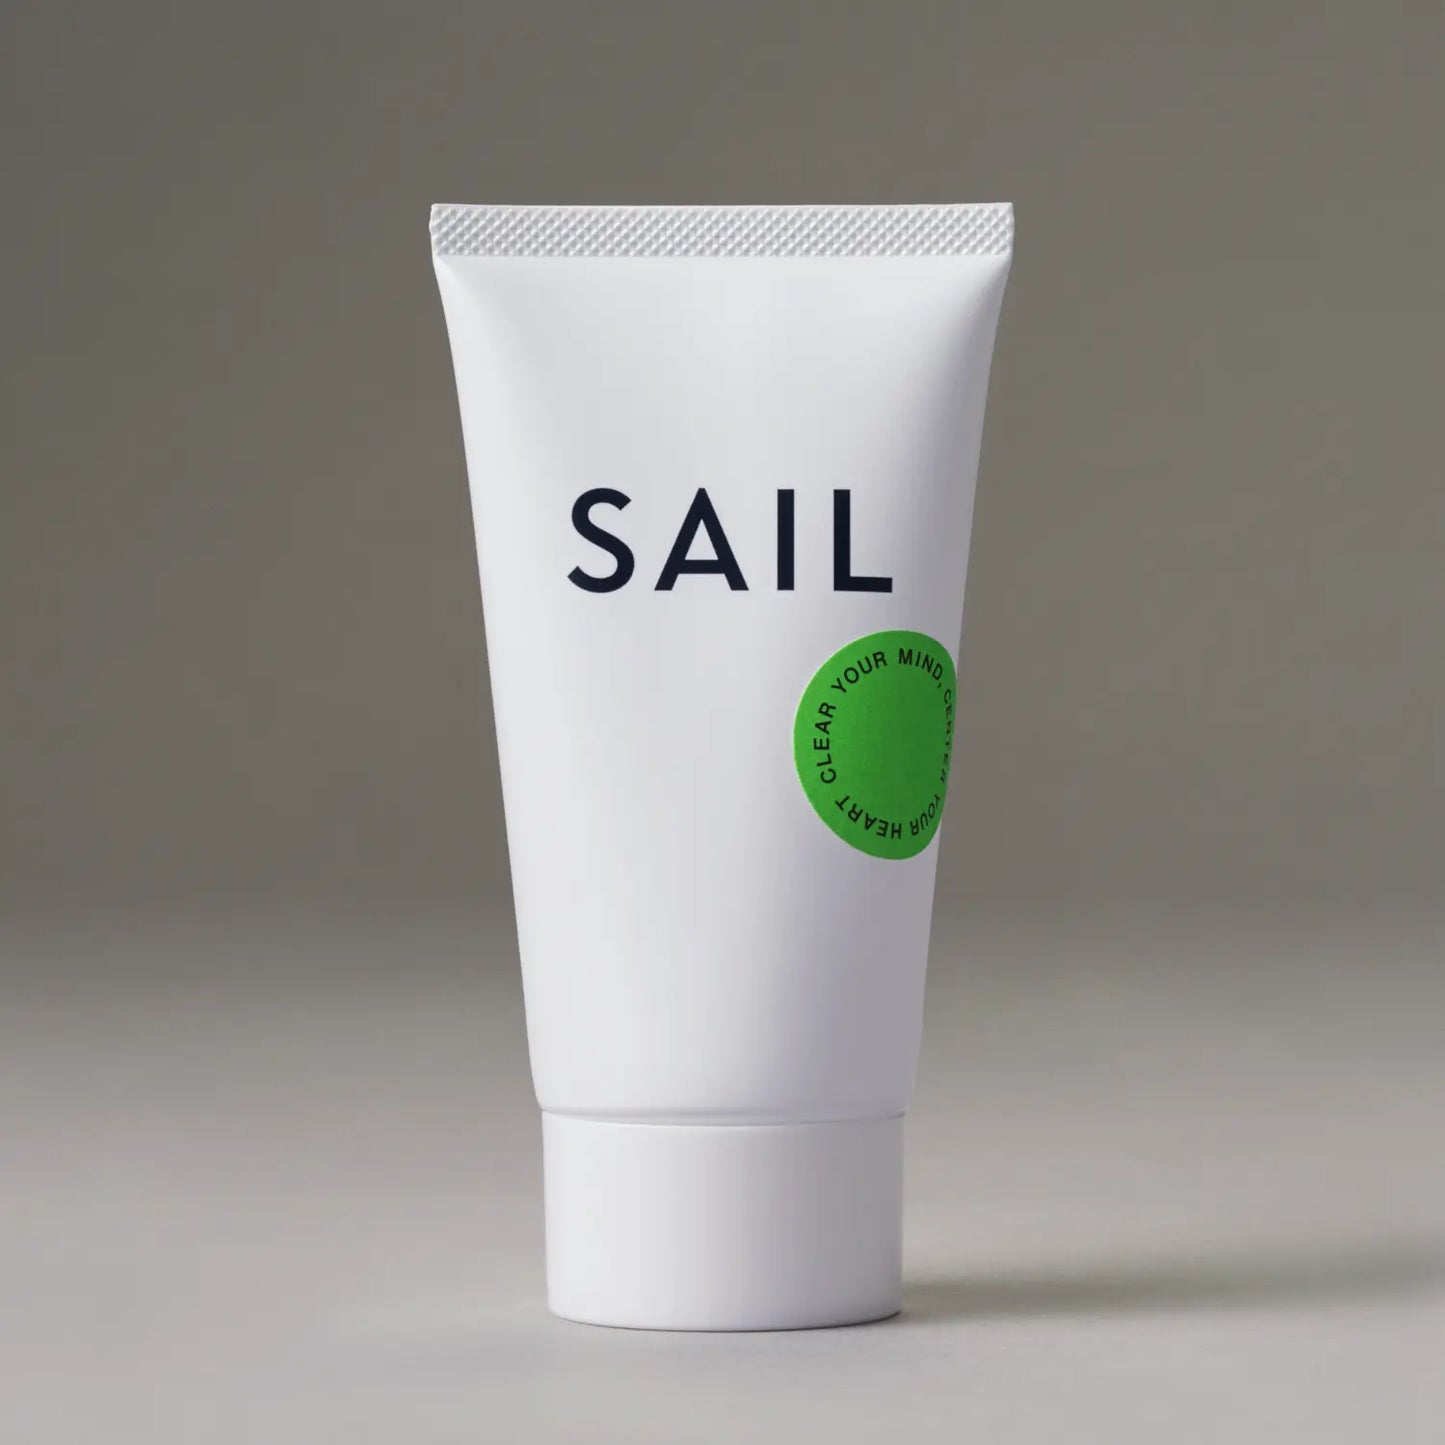 SAIL THE LIP BALM Unrequited Love "SPECIAL KIT"-D / THE LIP BALM Unrequited Love / Mint Chocolate Chip & BASE HAND CREAM